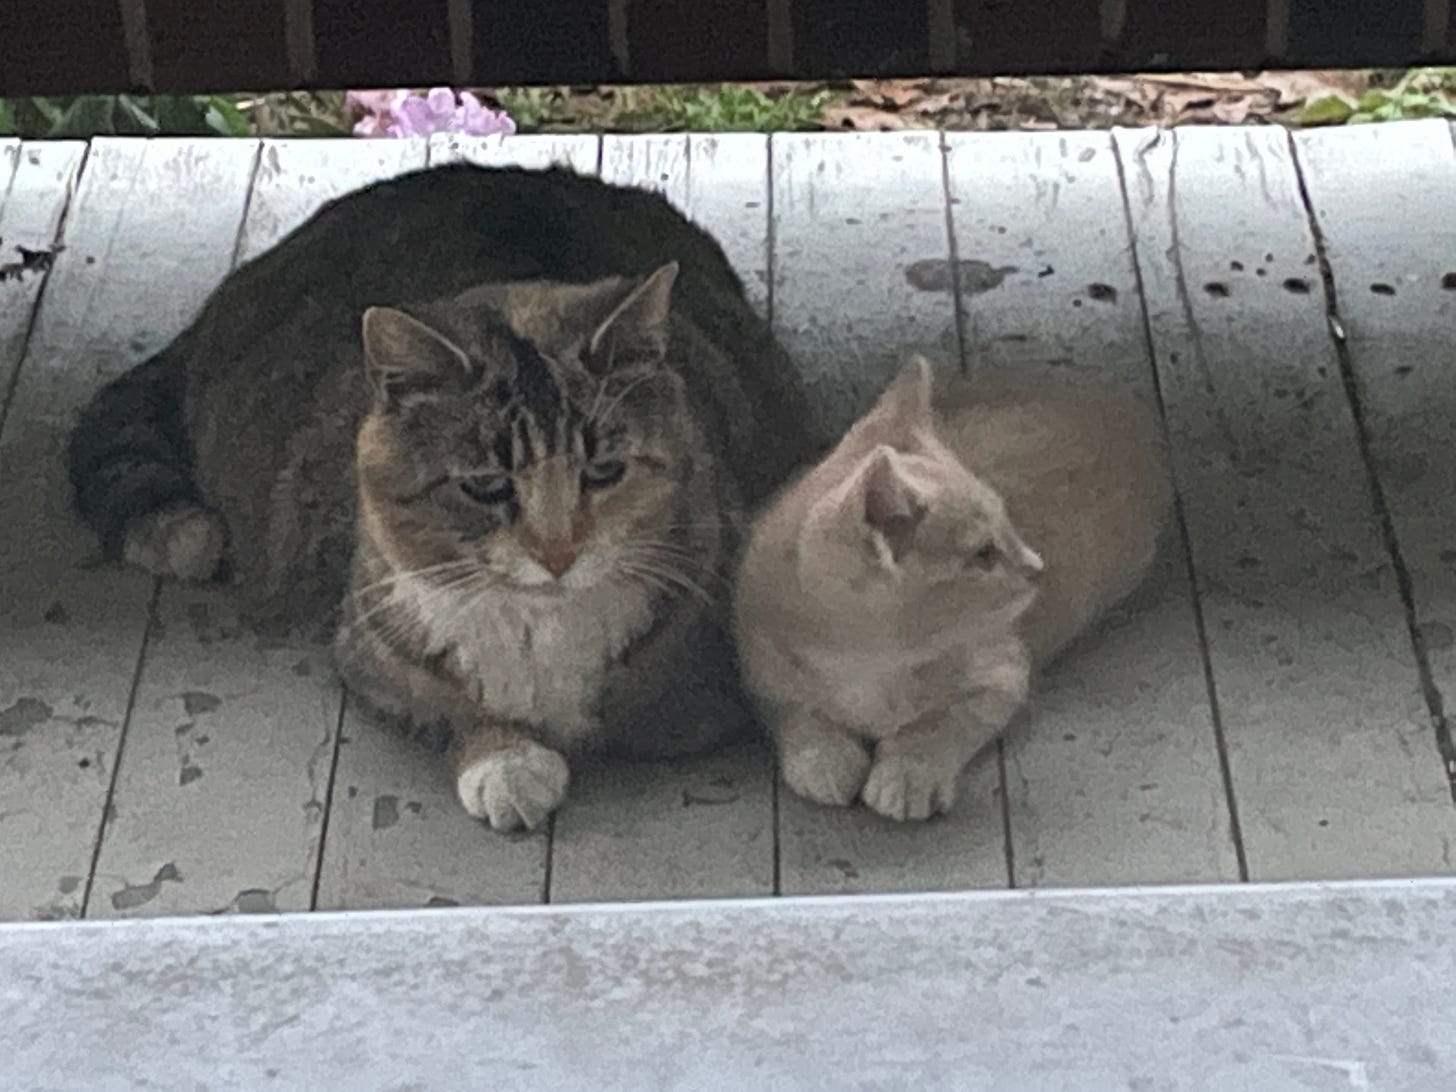 A mother cat and baby.